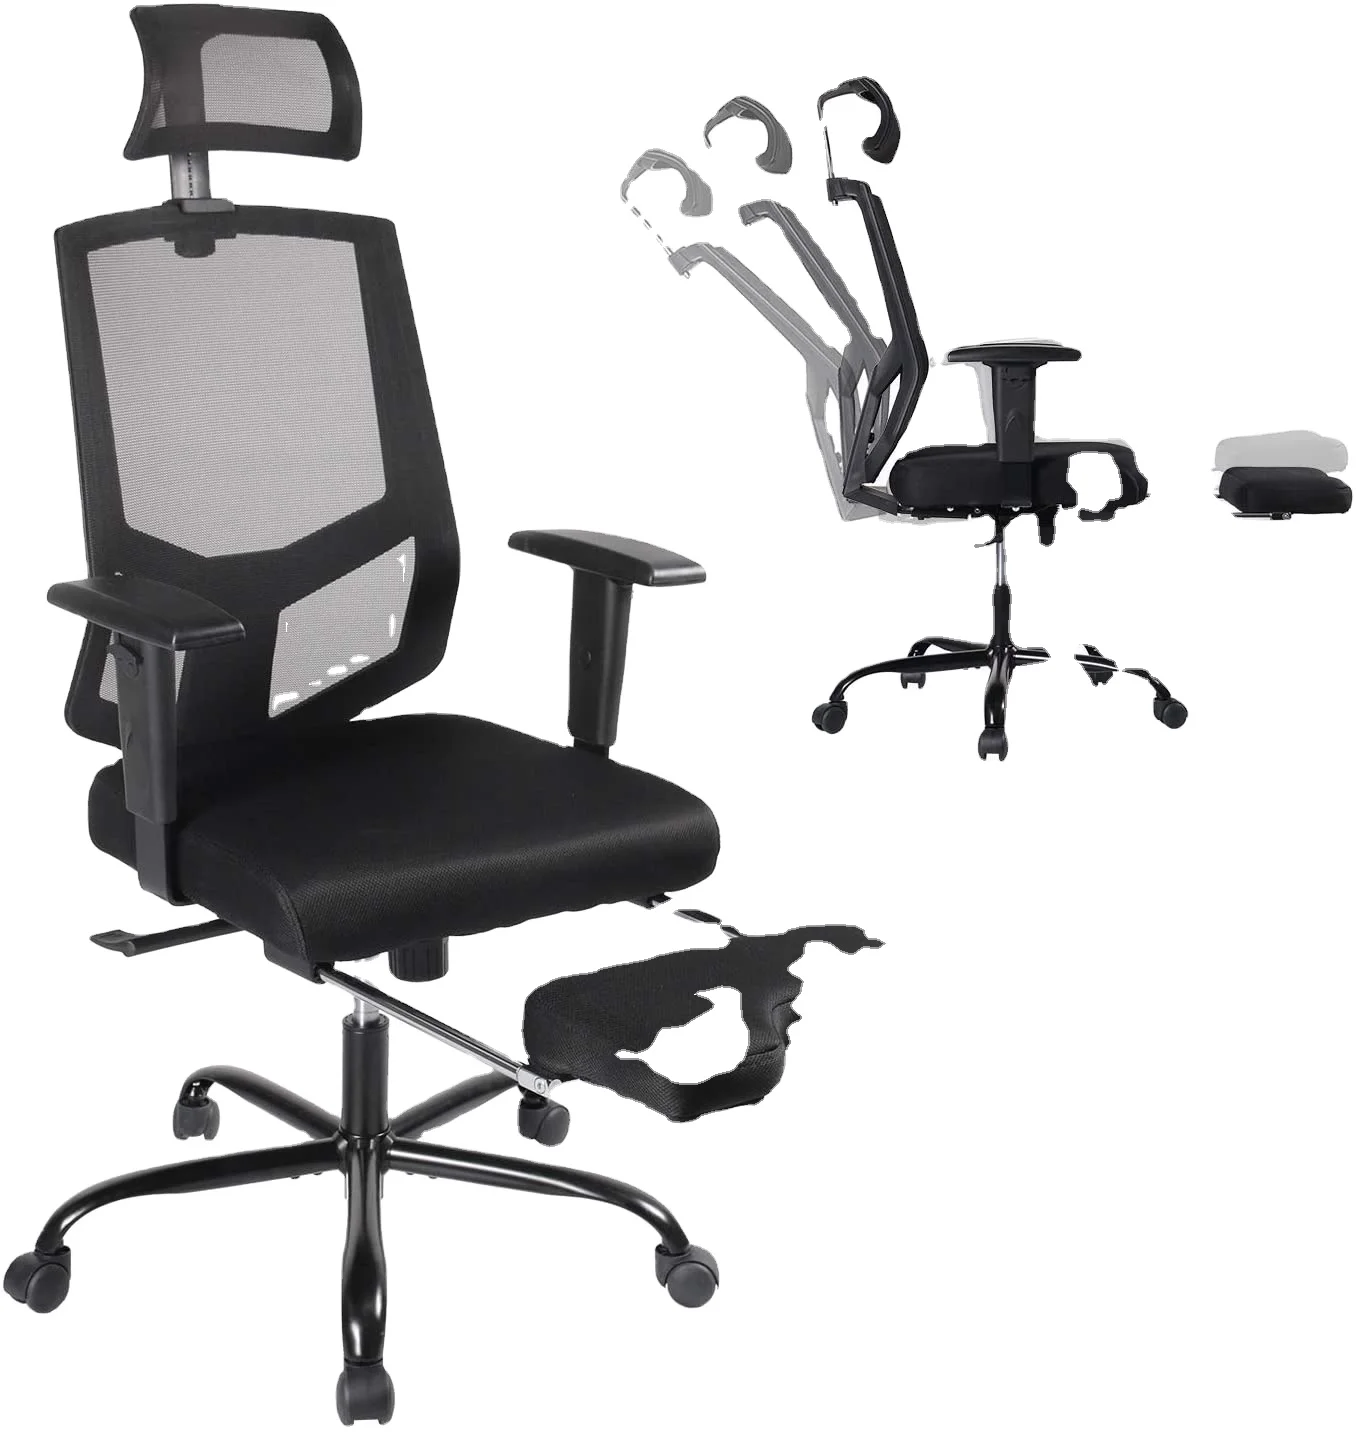 

Office Furniture Gamer Revolving Chair Racing Gaming Office Chair Computer PC Ergonomic Comfortable Office Chair Lot Stock in US